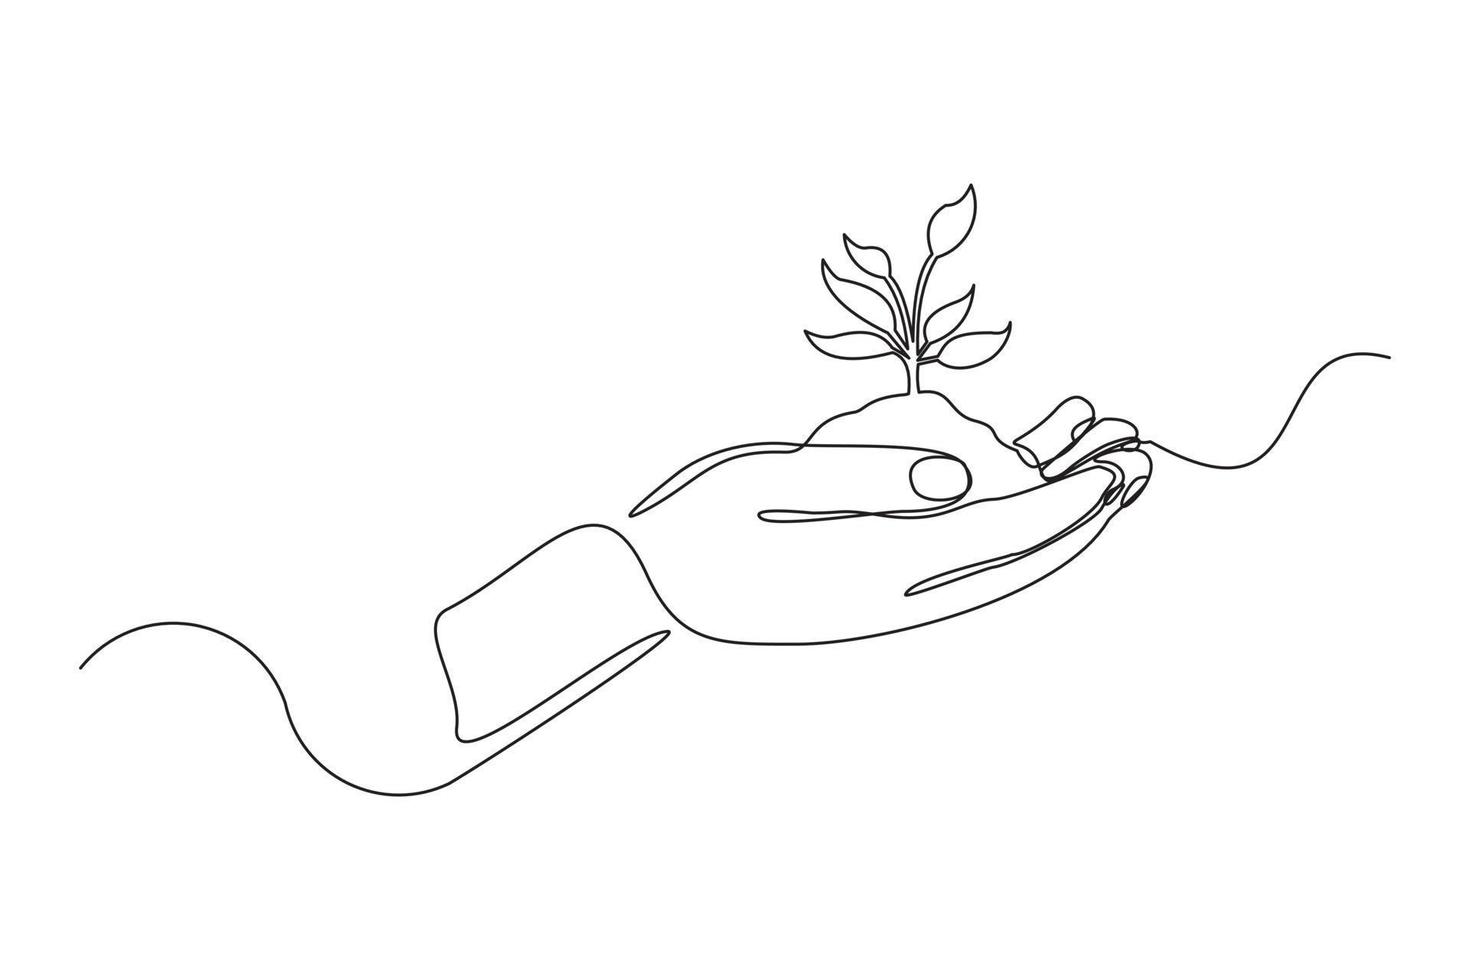 Continuous one line drawing palm hand holding together a green young plant. Single one line hand holding tree. Forest conservation concept design vector graphic illustration